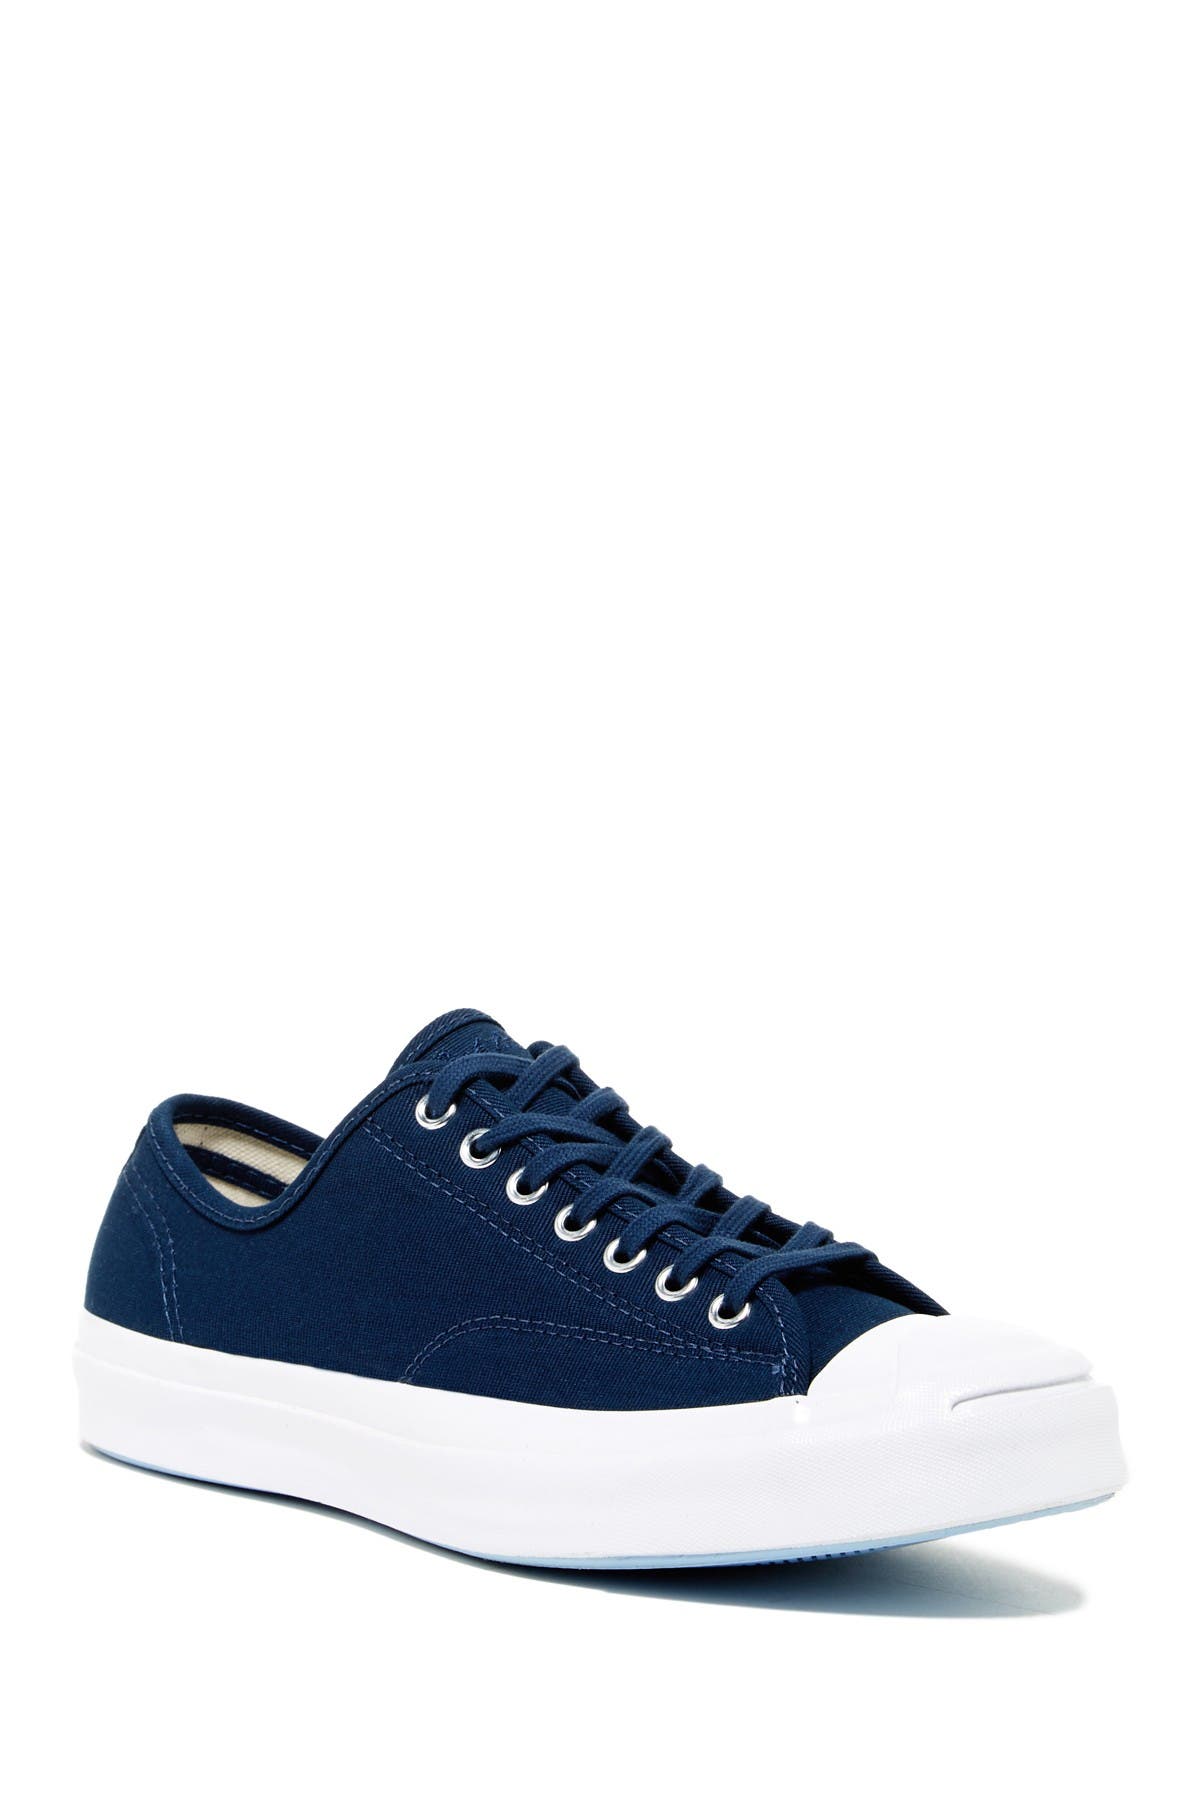 jack purcell navy